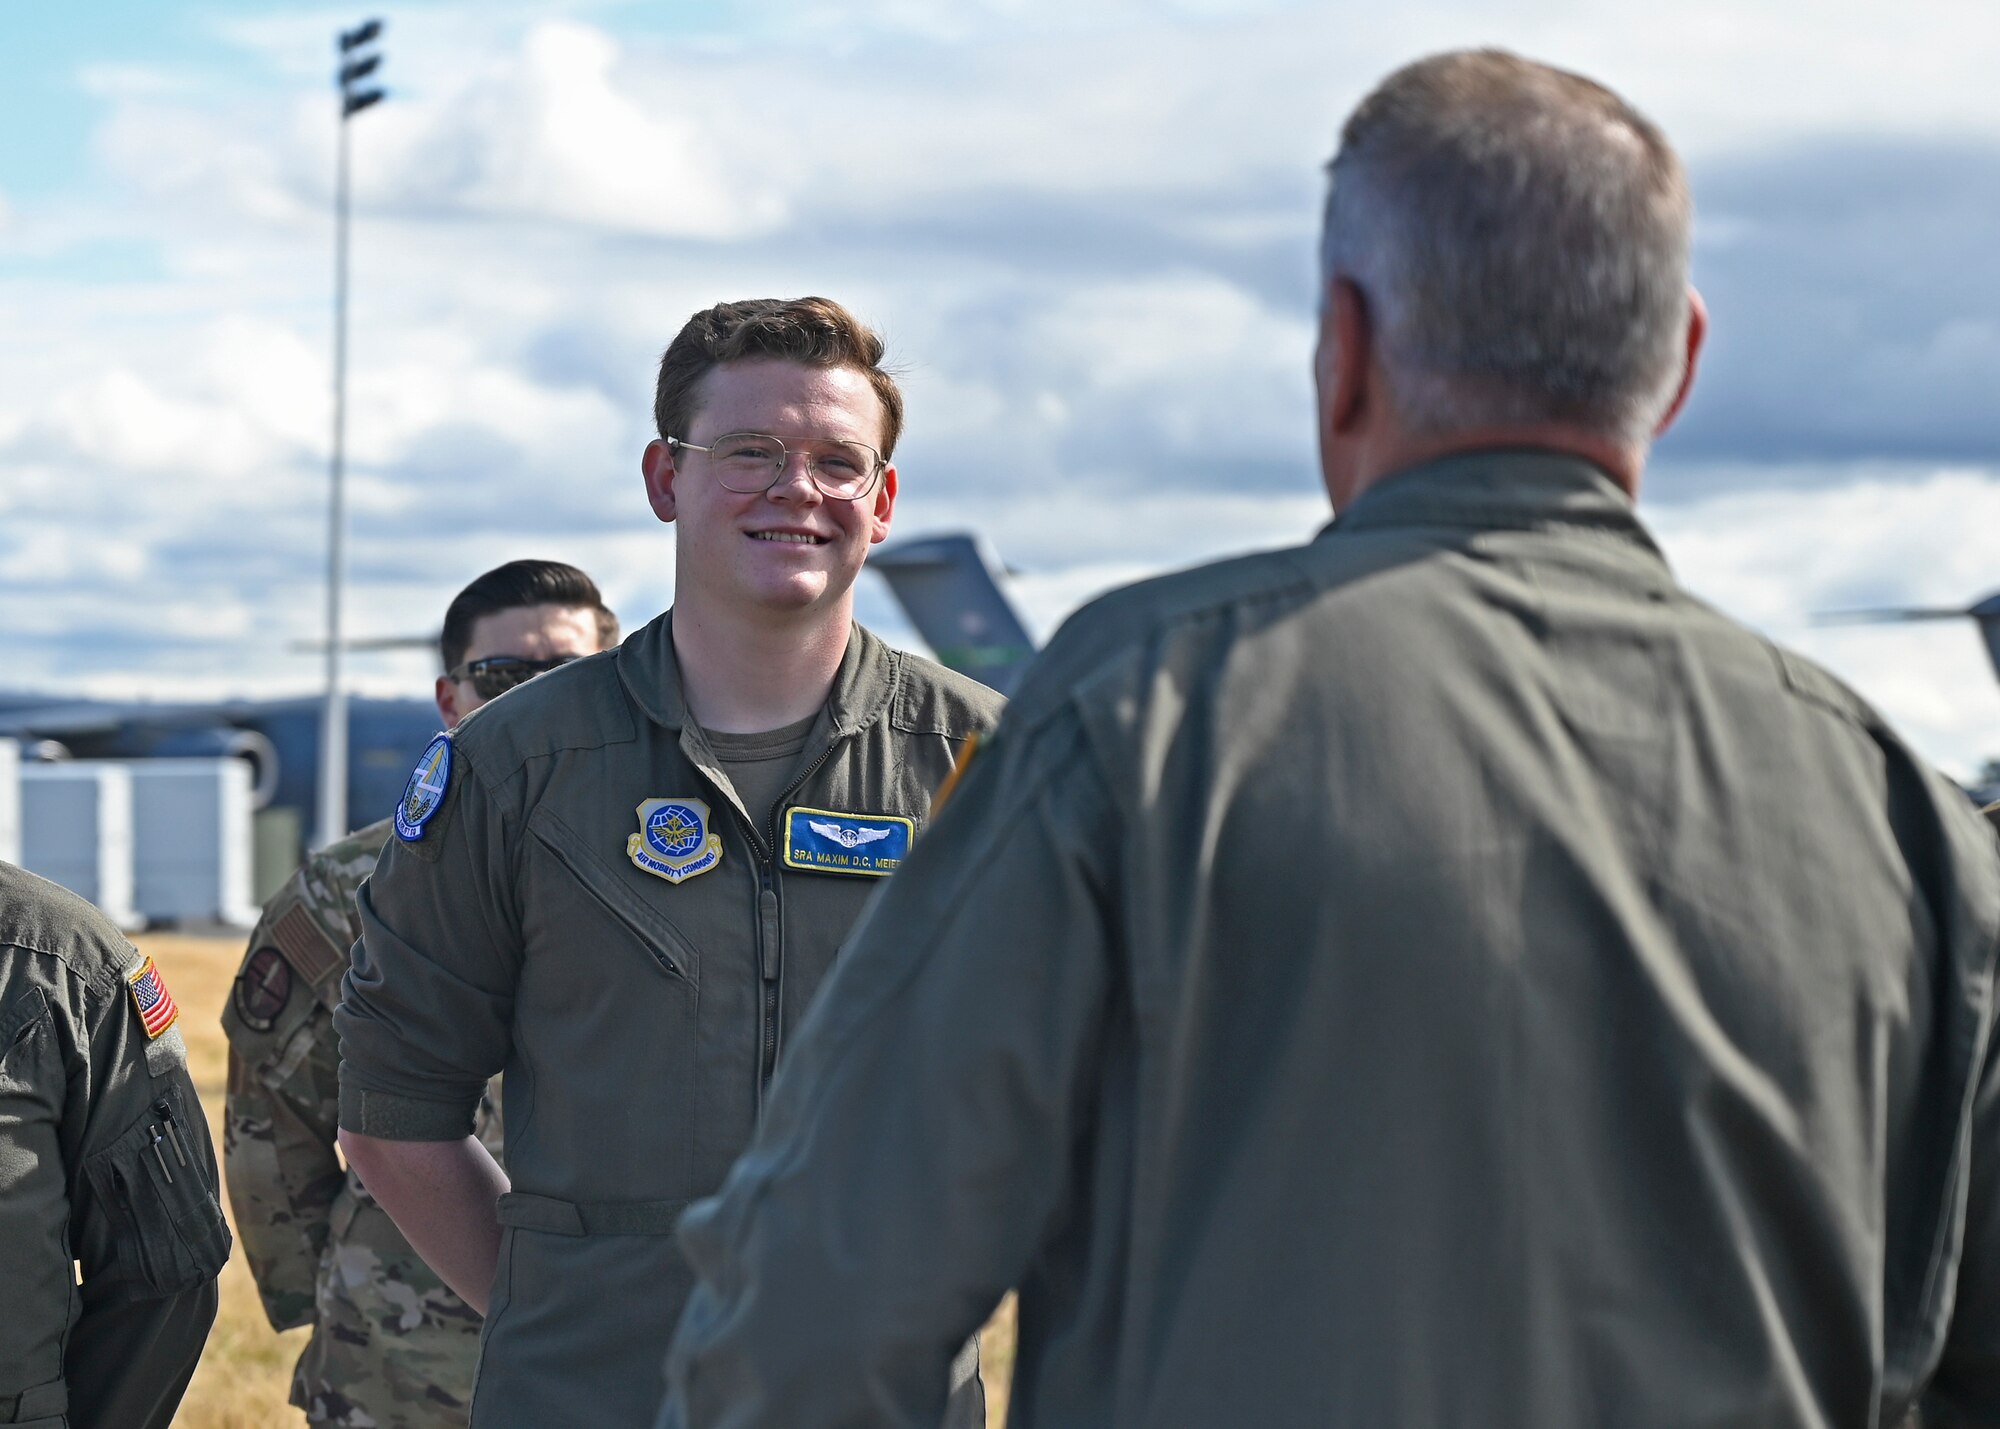 U.S. Air Force Gen. Mike Minihan, right, Air Mobility Command commander, coins Senior Airman Maxim Meier, a loadmaster with the 7th Airlift Squadron and one of the 2021 AMC Doolittle Award winners, during his visit to Joint Base Lewis-McChord, Washington, July 7, 2022. The crew of RCH683 was recognized for their participation in Operation ALLIES REFUGE, which enabled thousands of Afghani’s evacuation from Kabul, Afghanistan, in August 2021. (U.S. Air Force photo by Senior Airman Callie Norton)